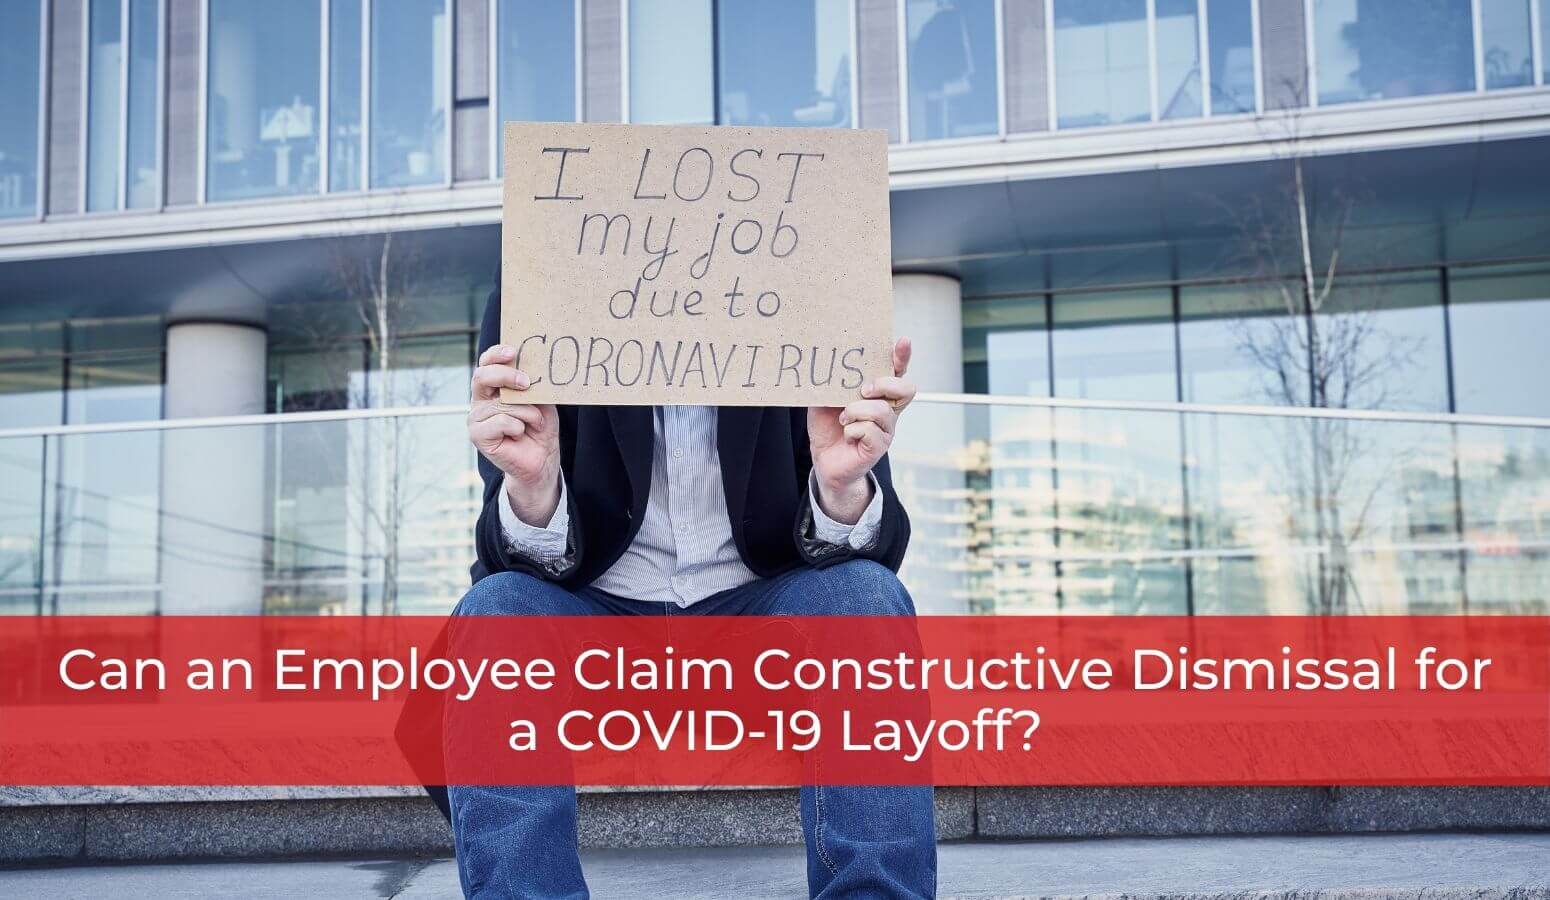 Claim Constructive Dismissal for a COVID-19 Layoff